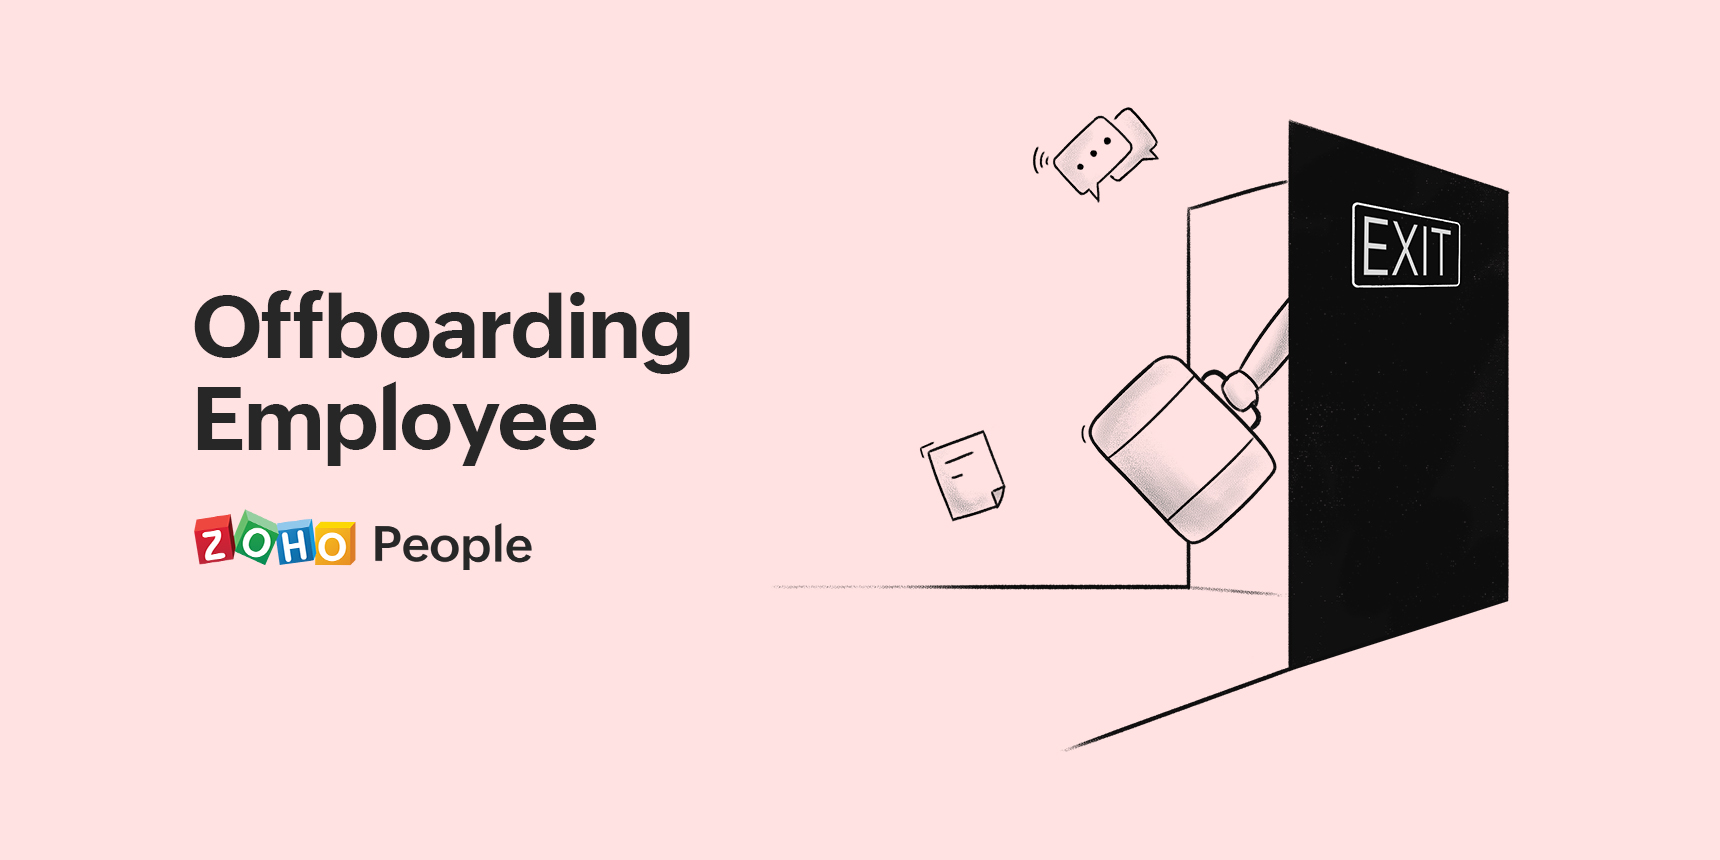 Different steps involved in offboarding employees